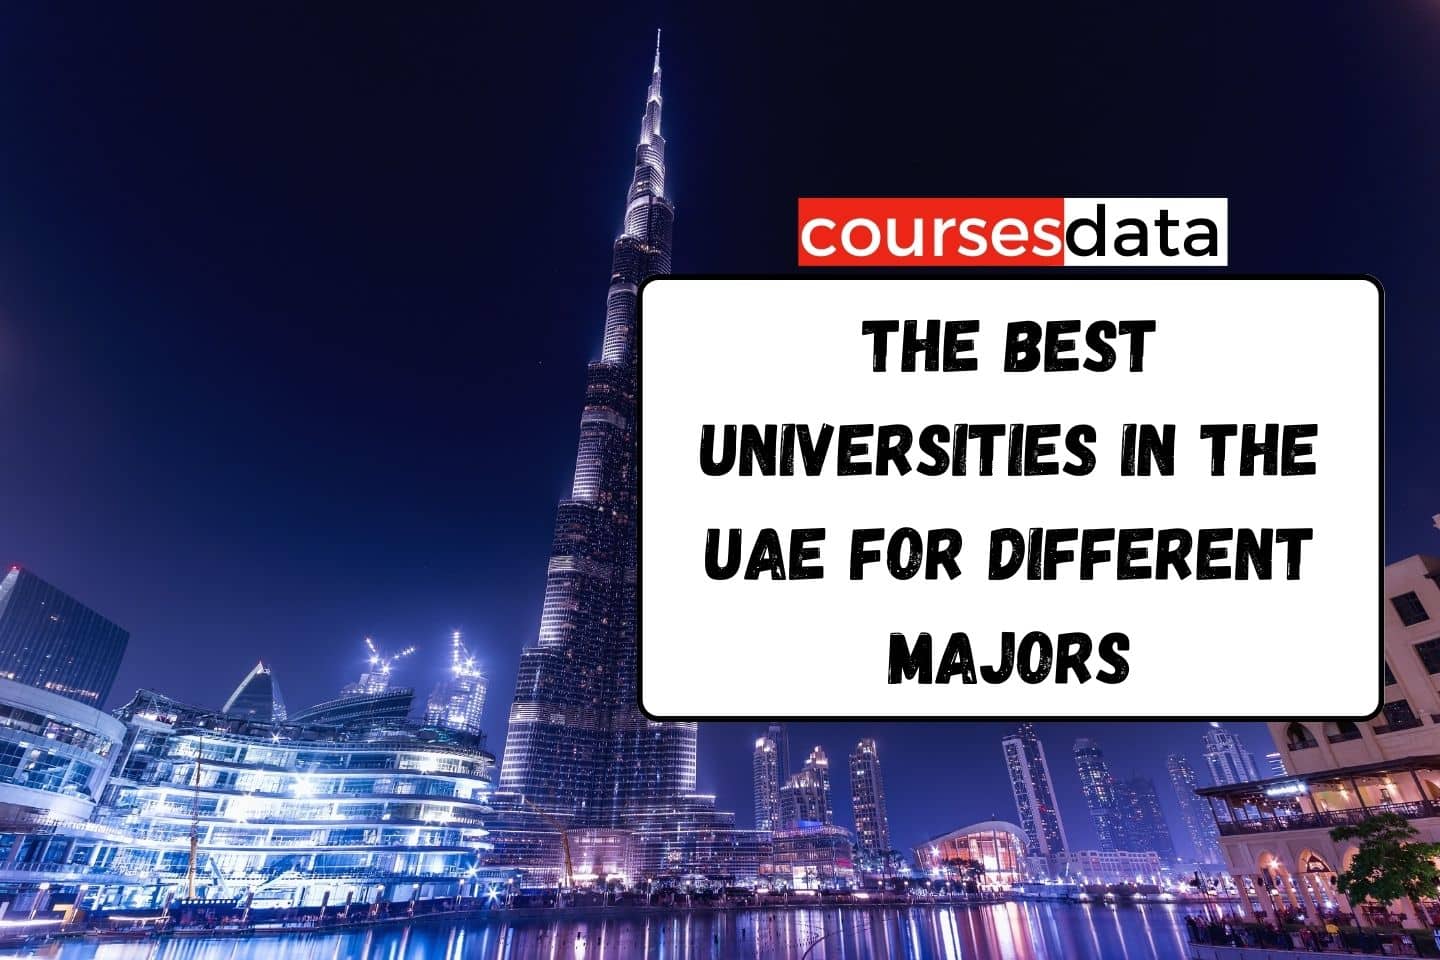 The Best Universities in the UAE for Different Majors